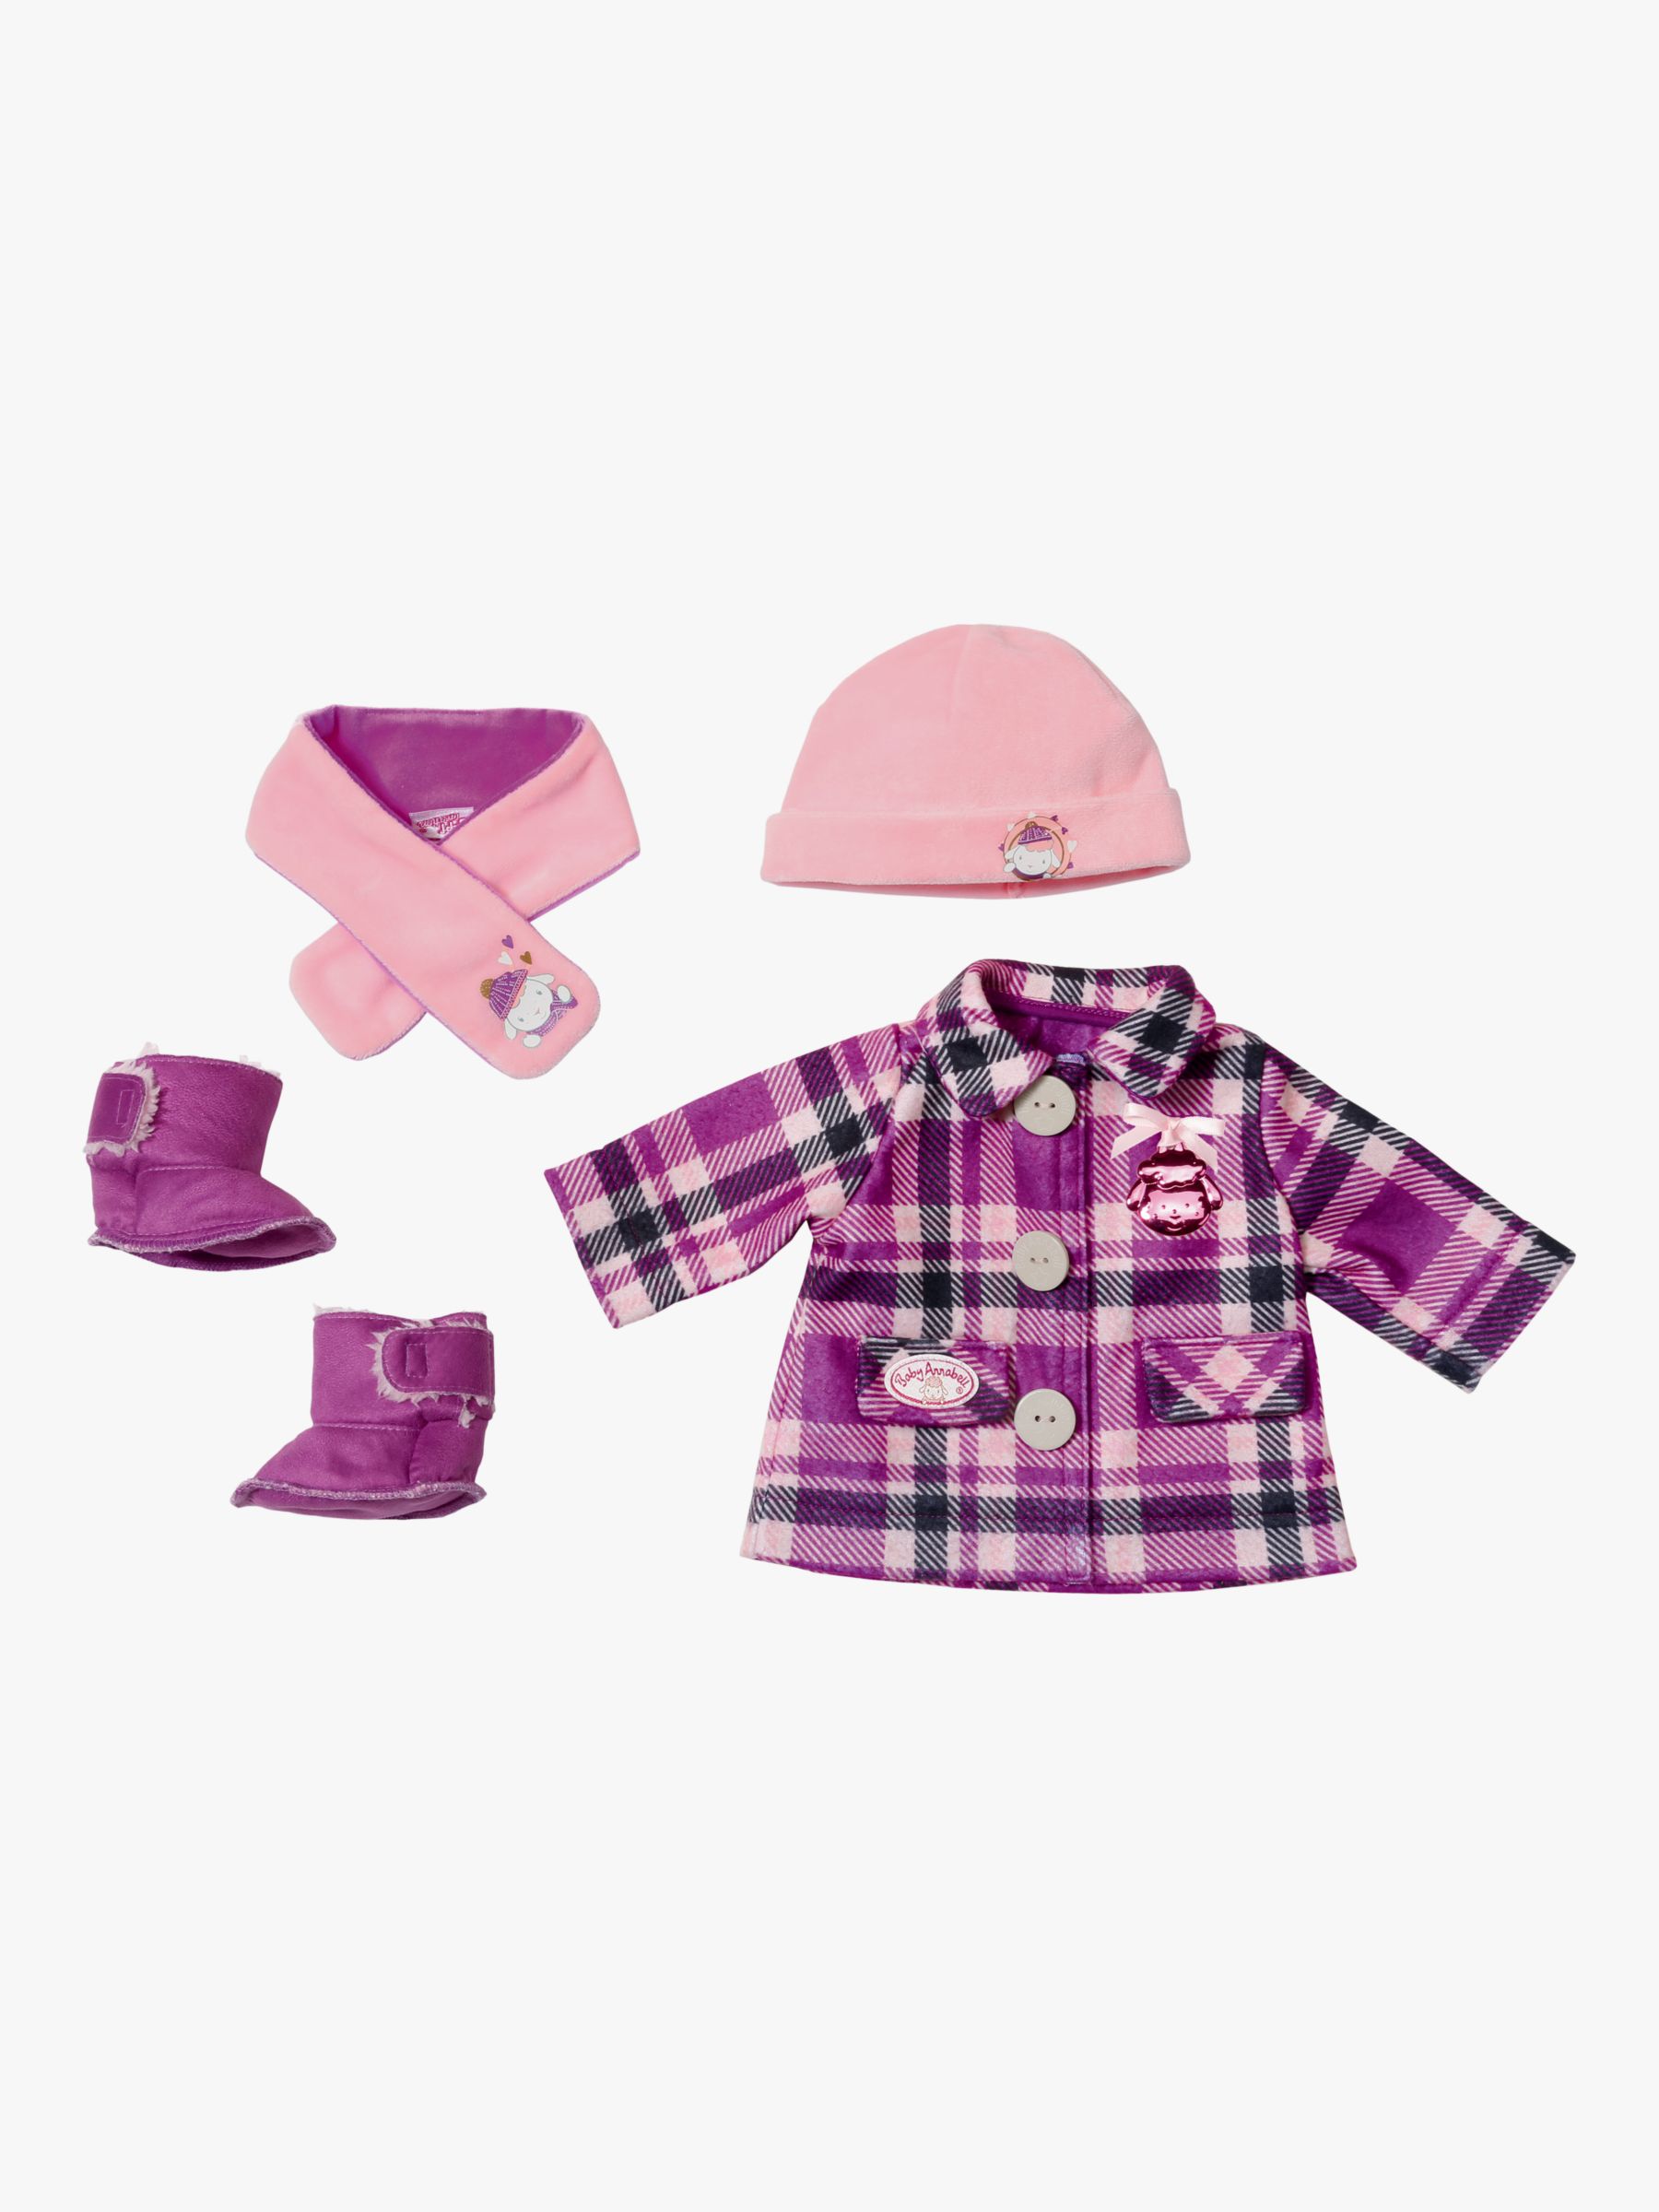 Zapf Baby Annabell Deluxe Coat Set at 